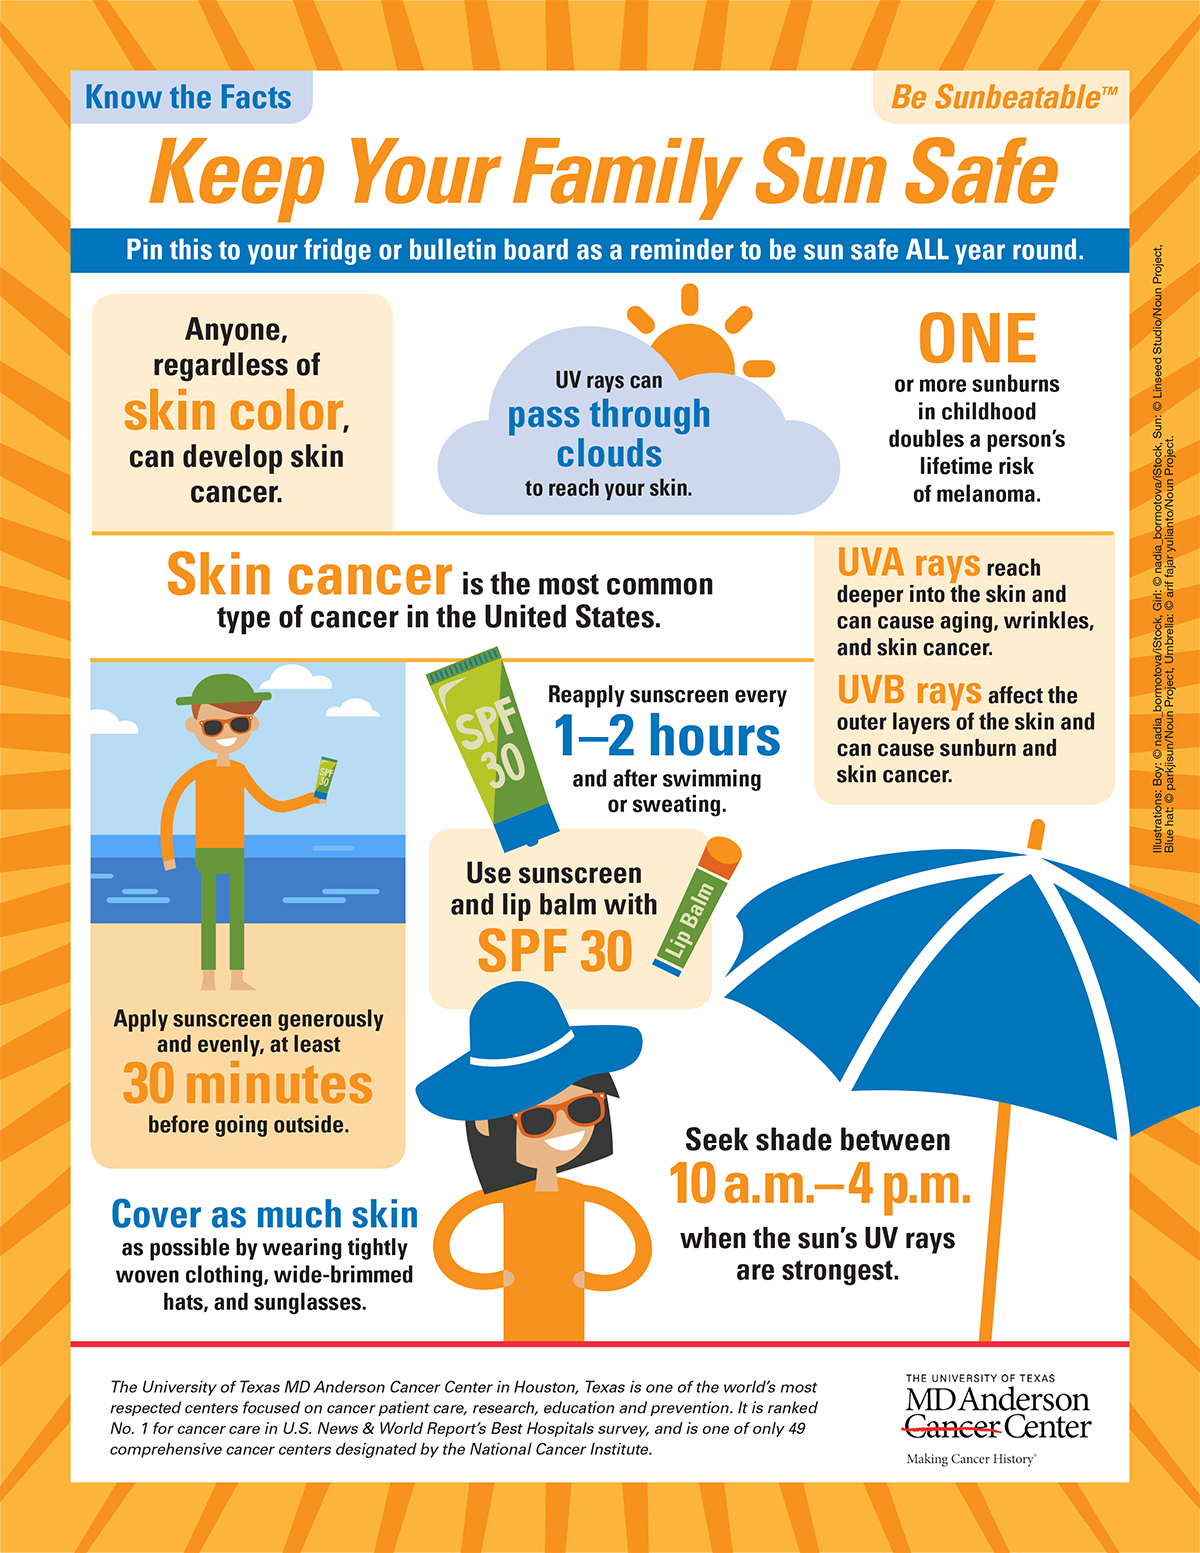 How to Tan Faster in the Sun Safely: 10 Tips, Risks & Precautions